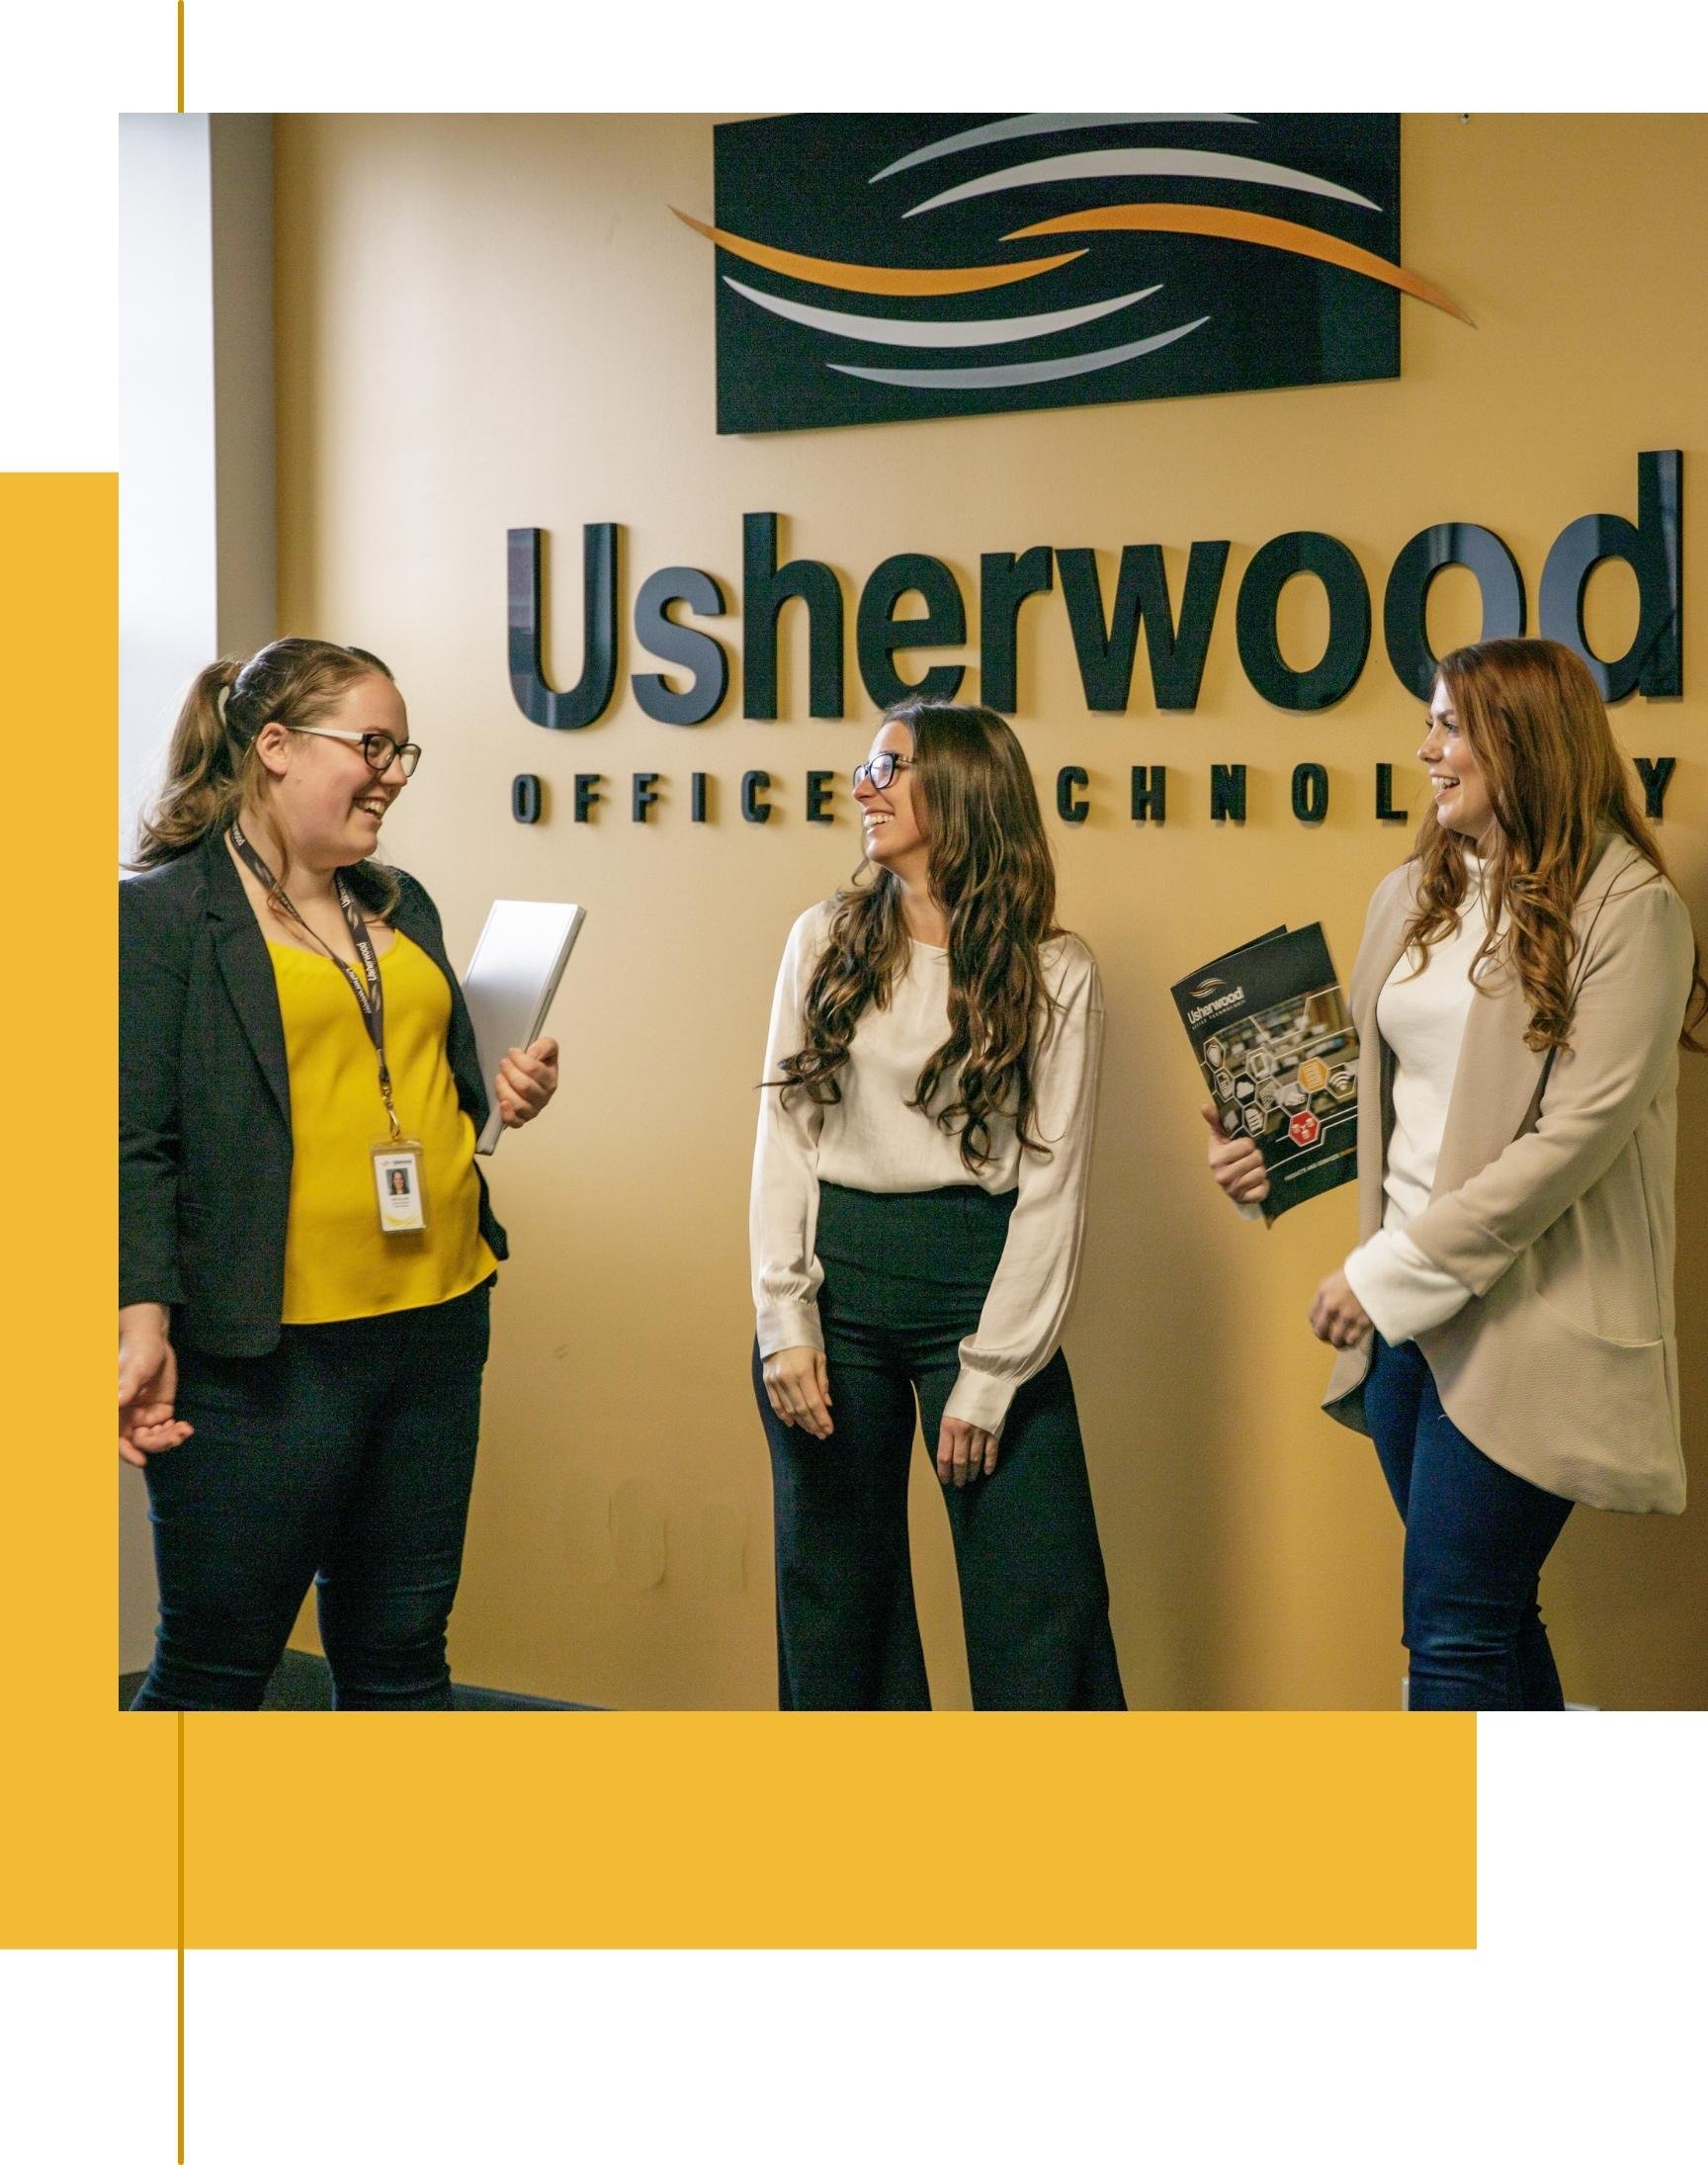 Three women employees standing, talking and smiling in front of Usherwood sign